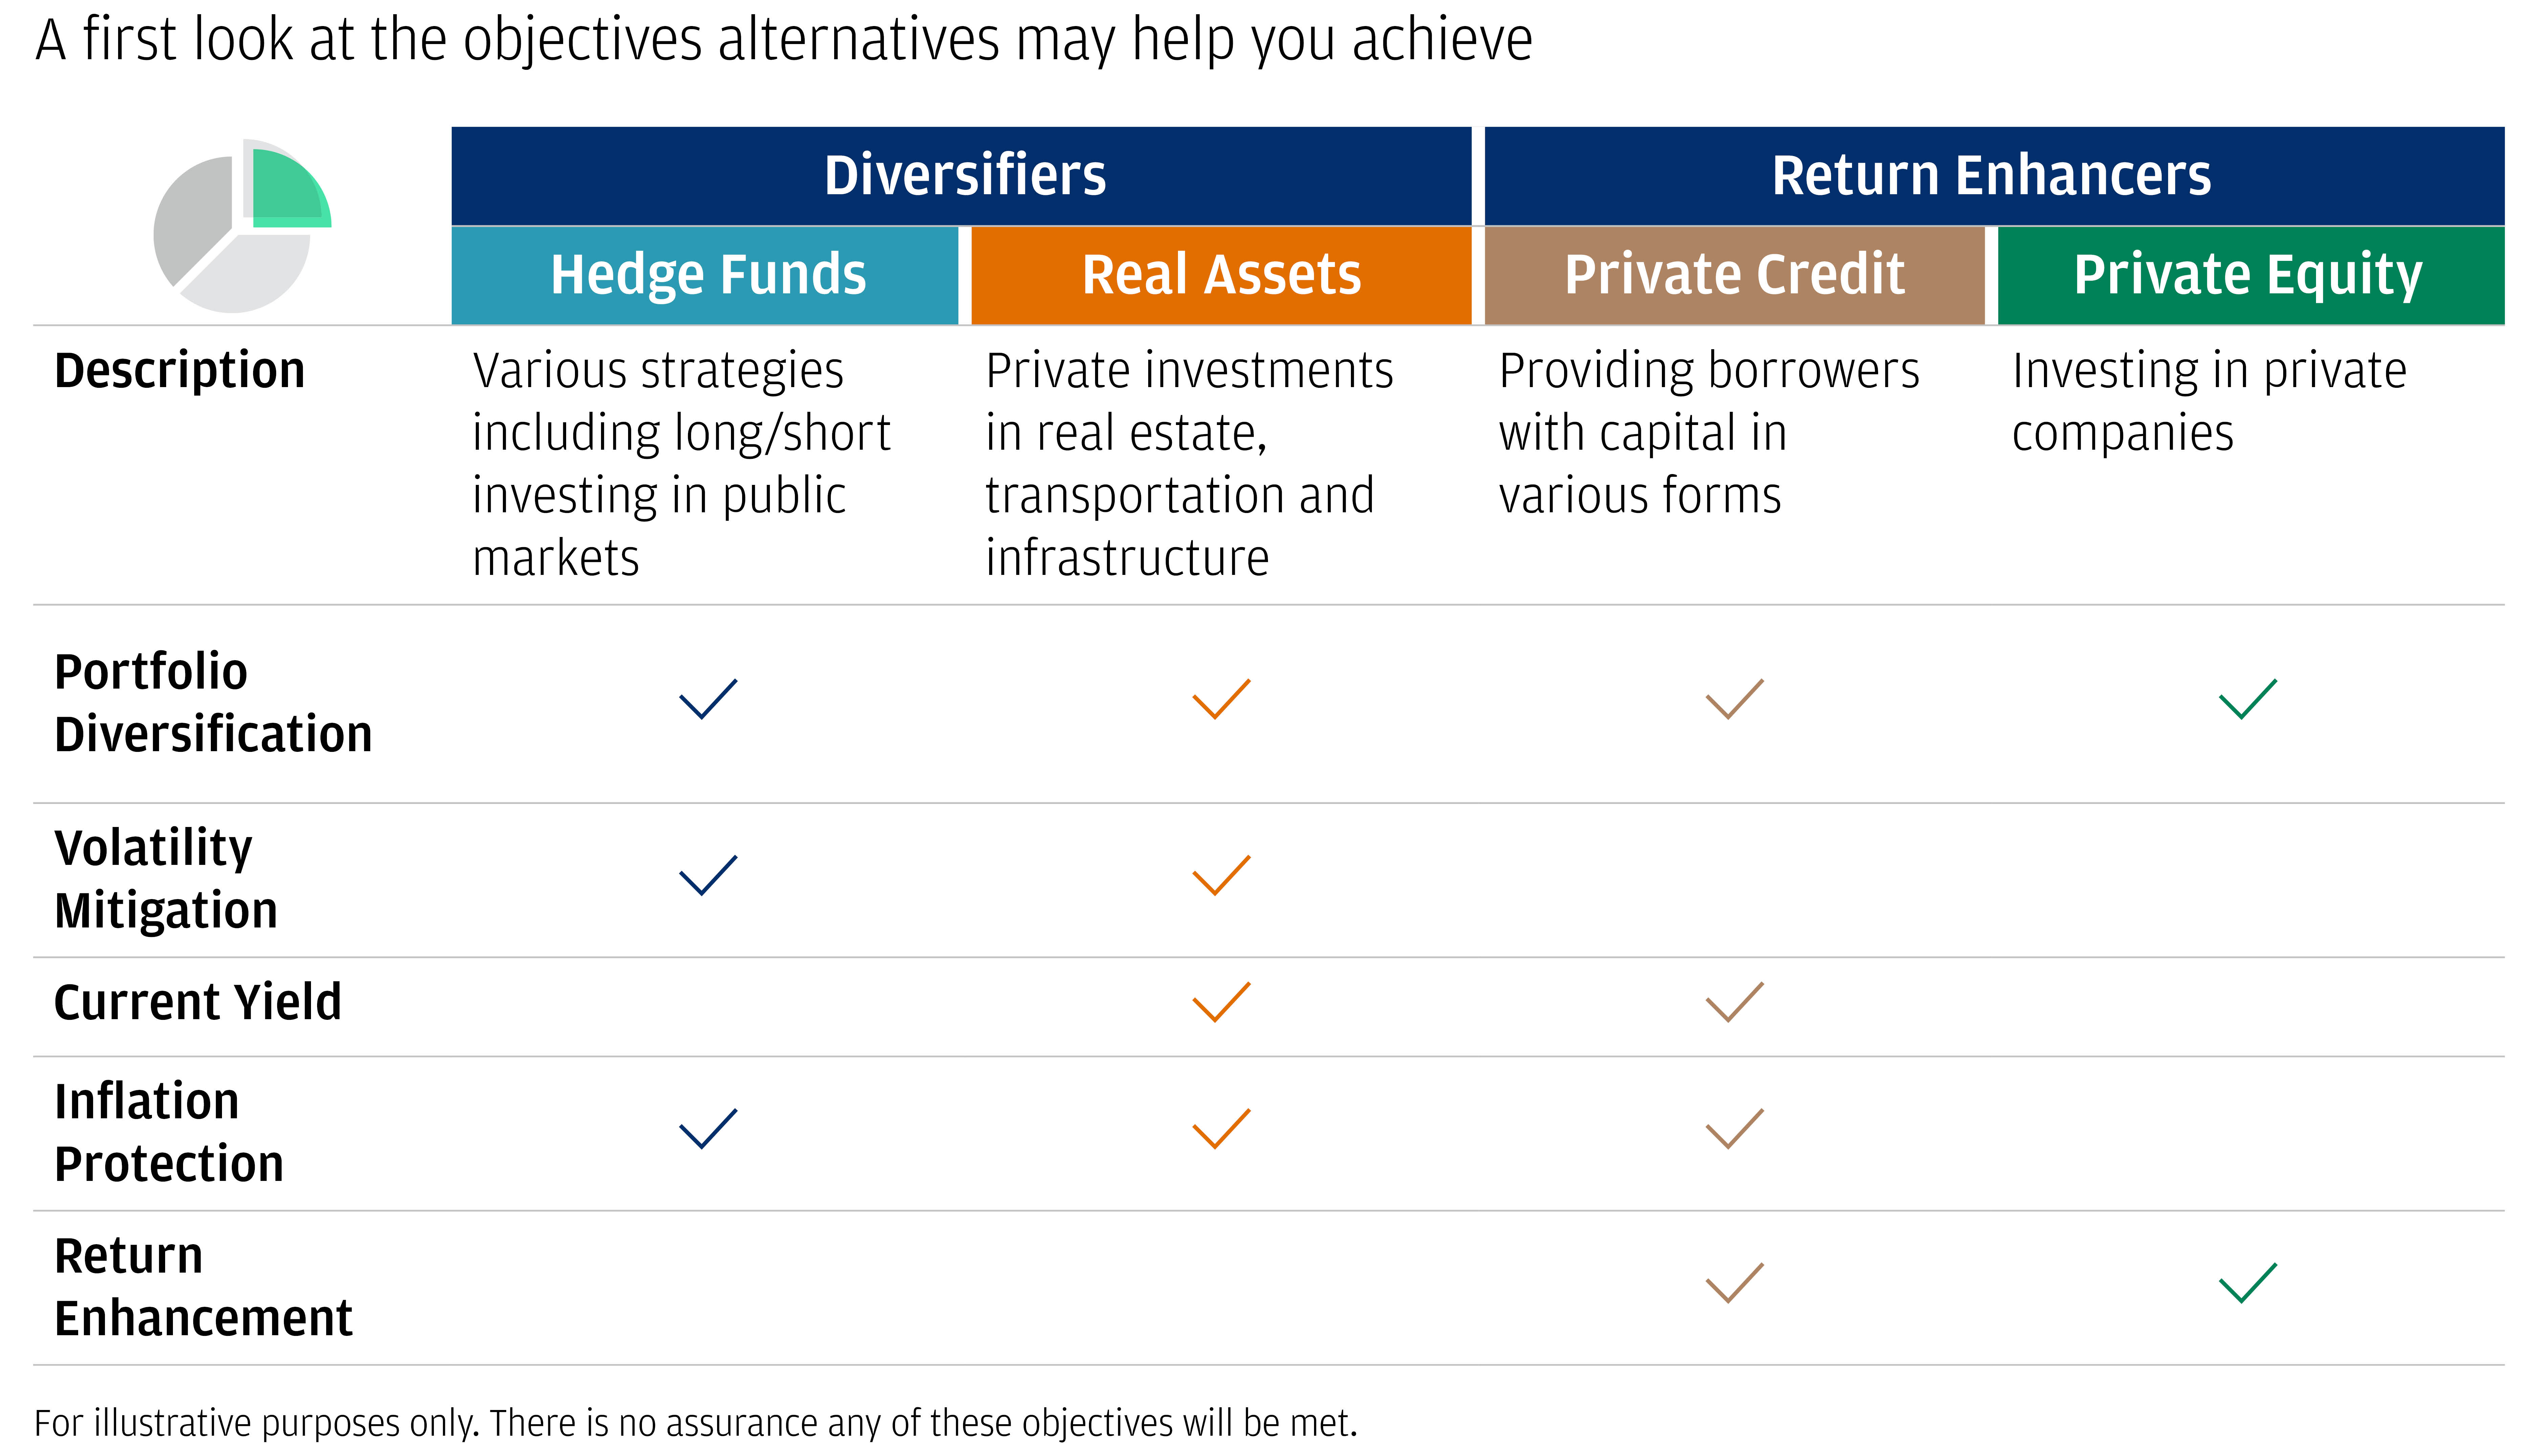 This table shows the four major asset classes within alternatives and the objectives they may be able to help you achieve.